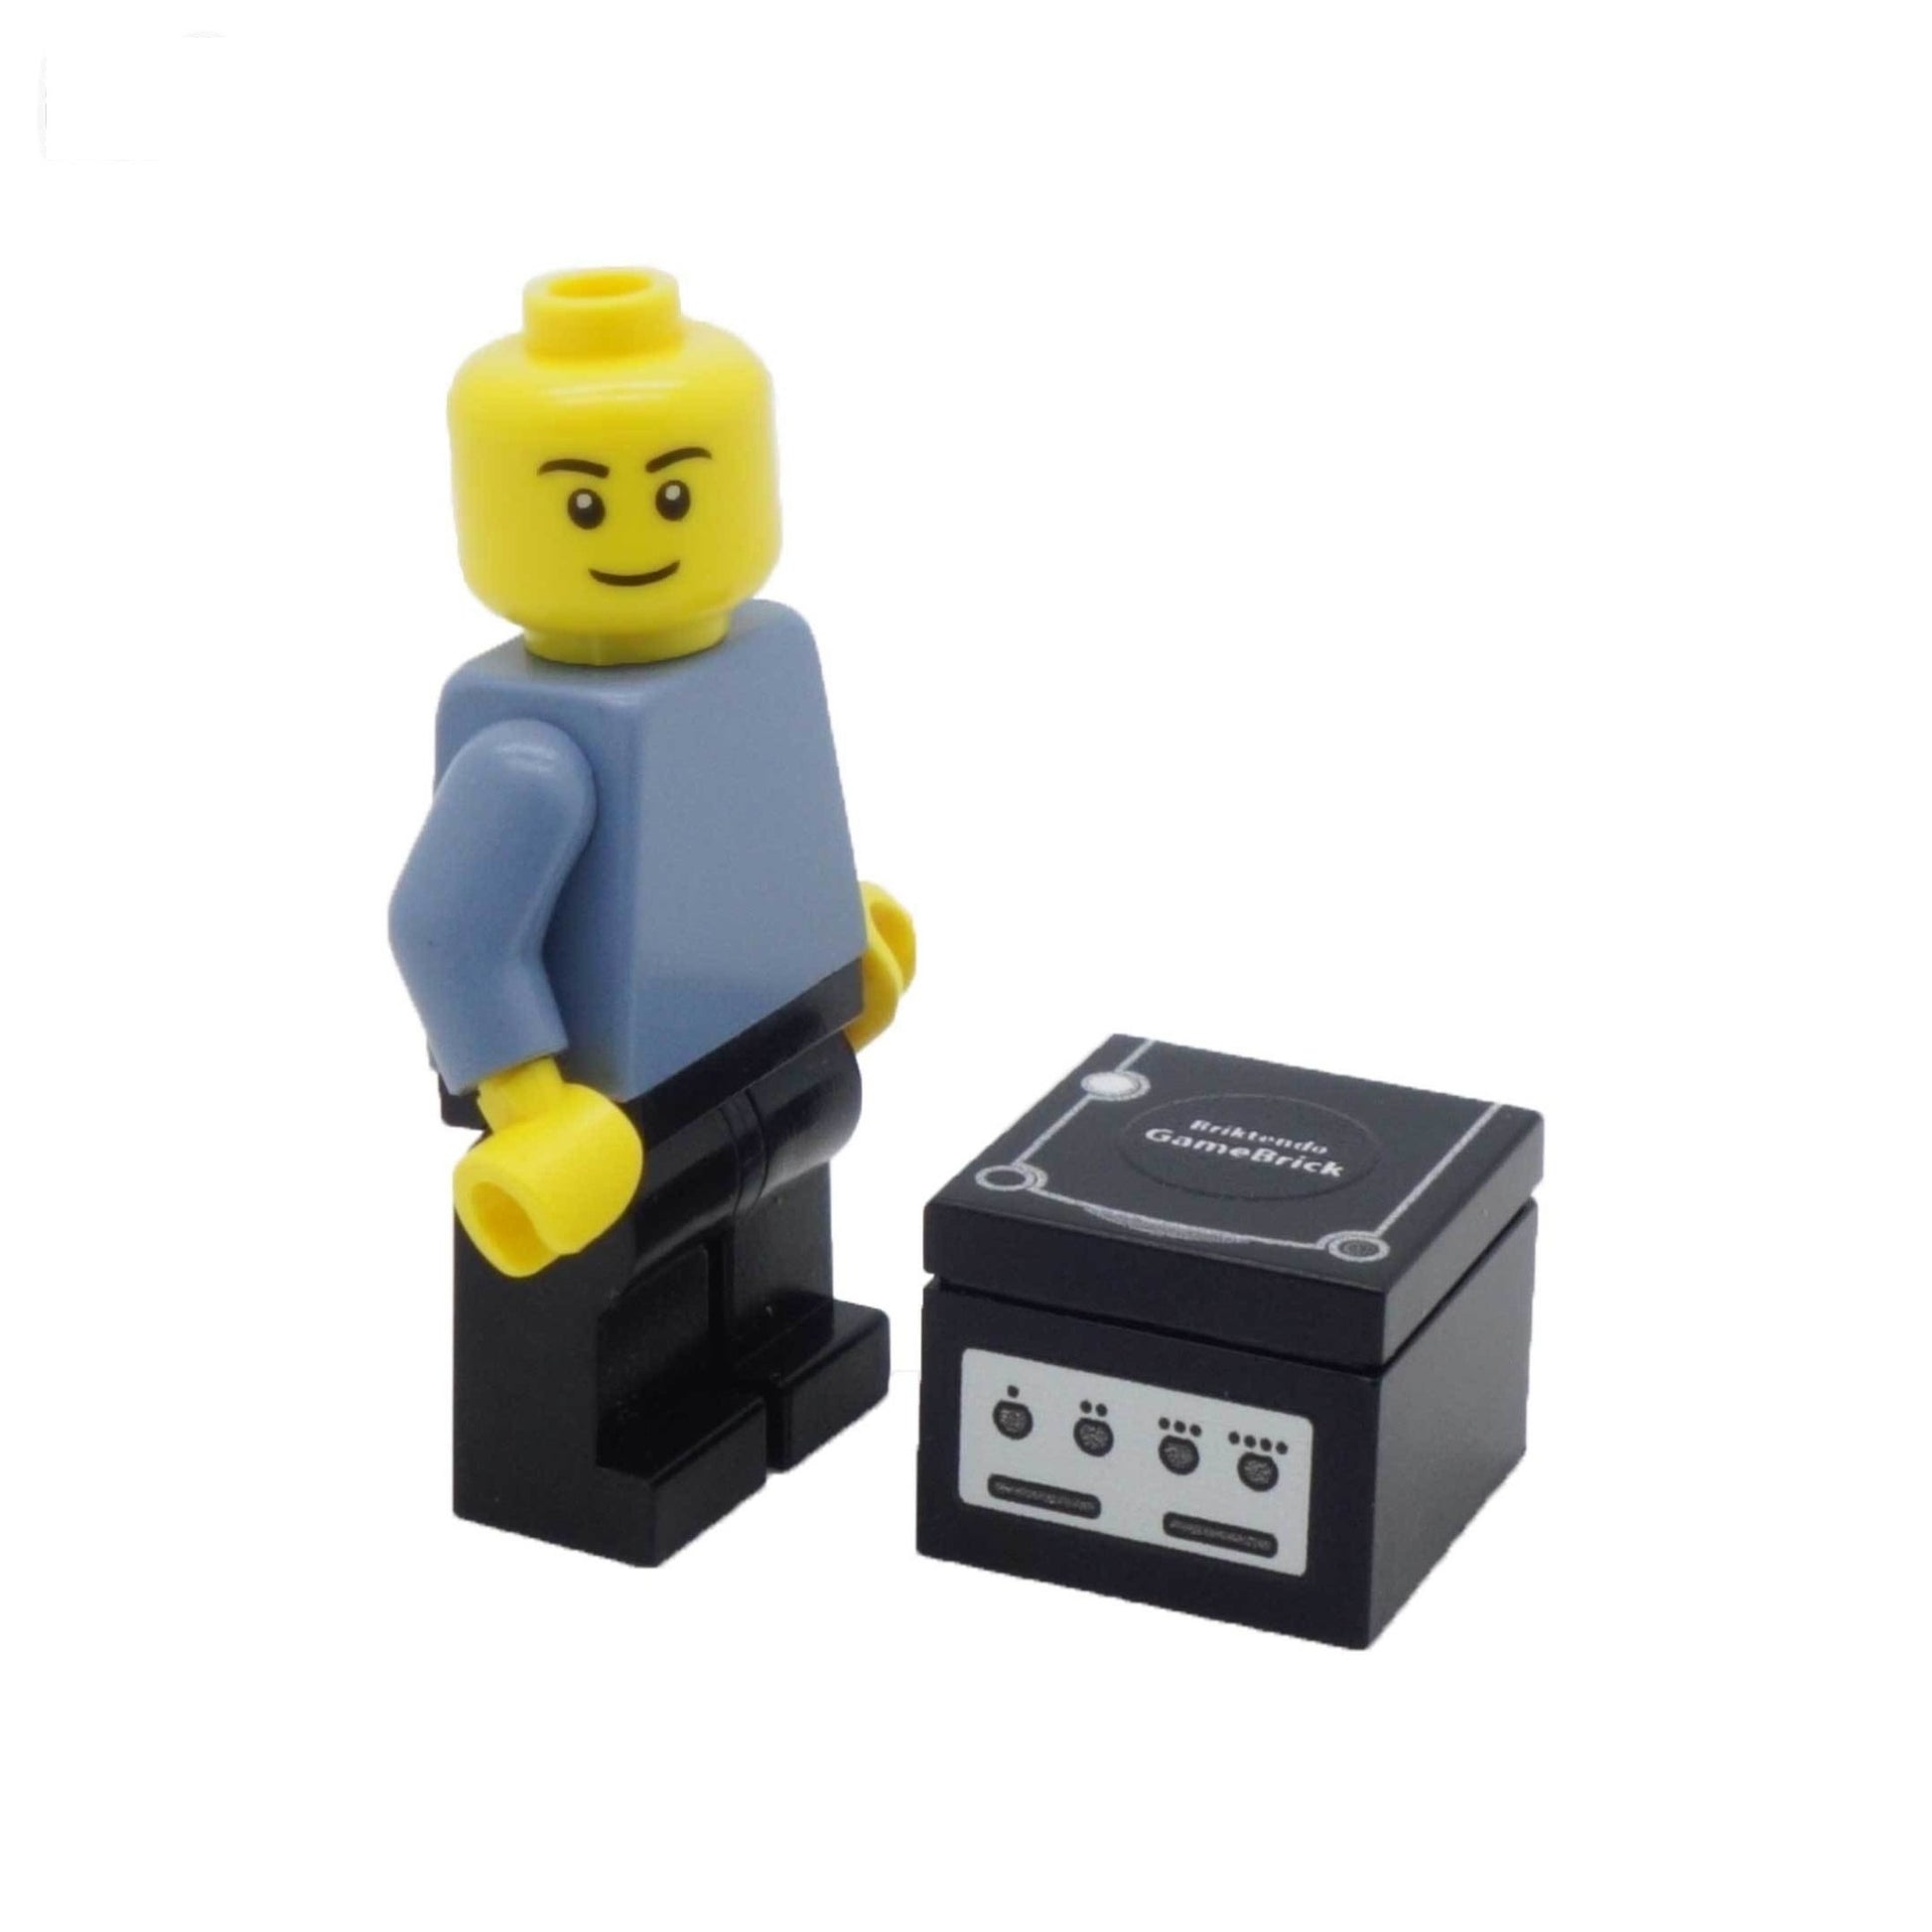 Custom Minifigure Gamer With Game Pad Made of LEGO Parts Perfect Gift for  Kids & Adults, Boy, Men, Video Games Fan 